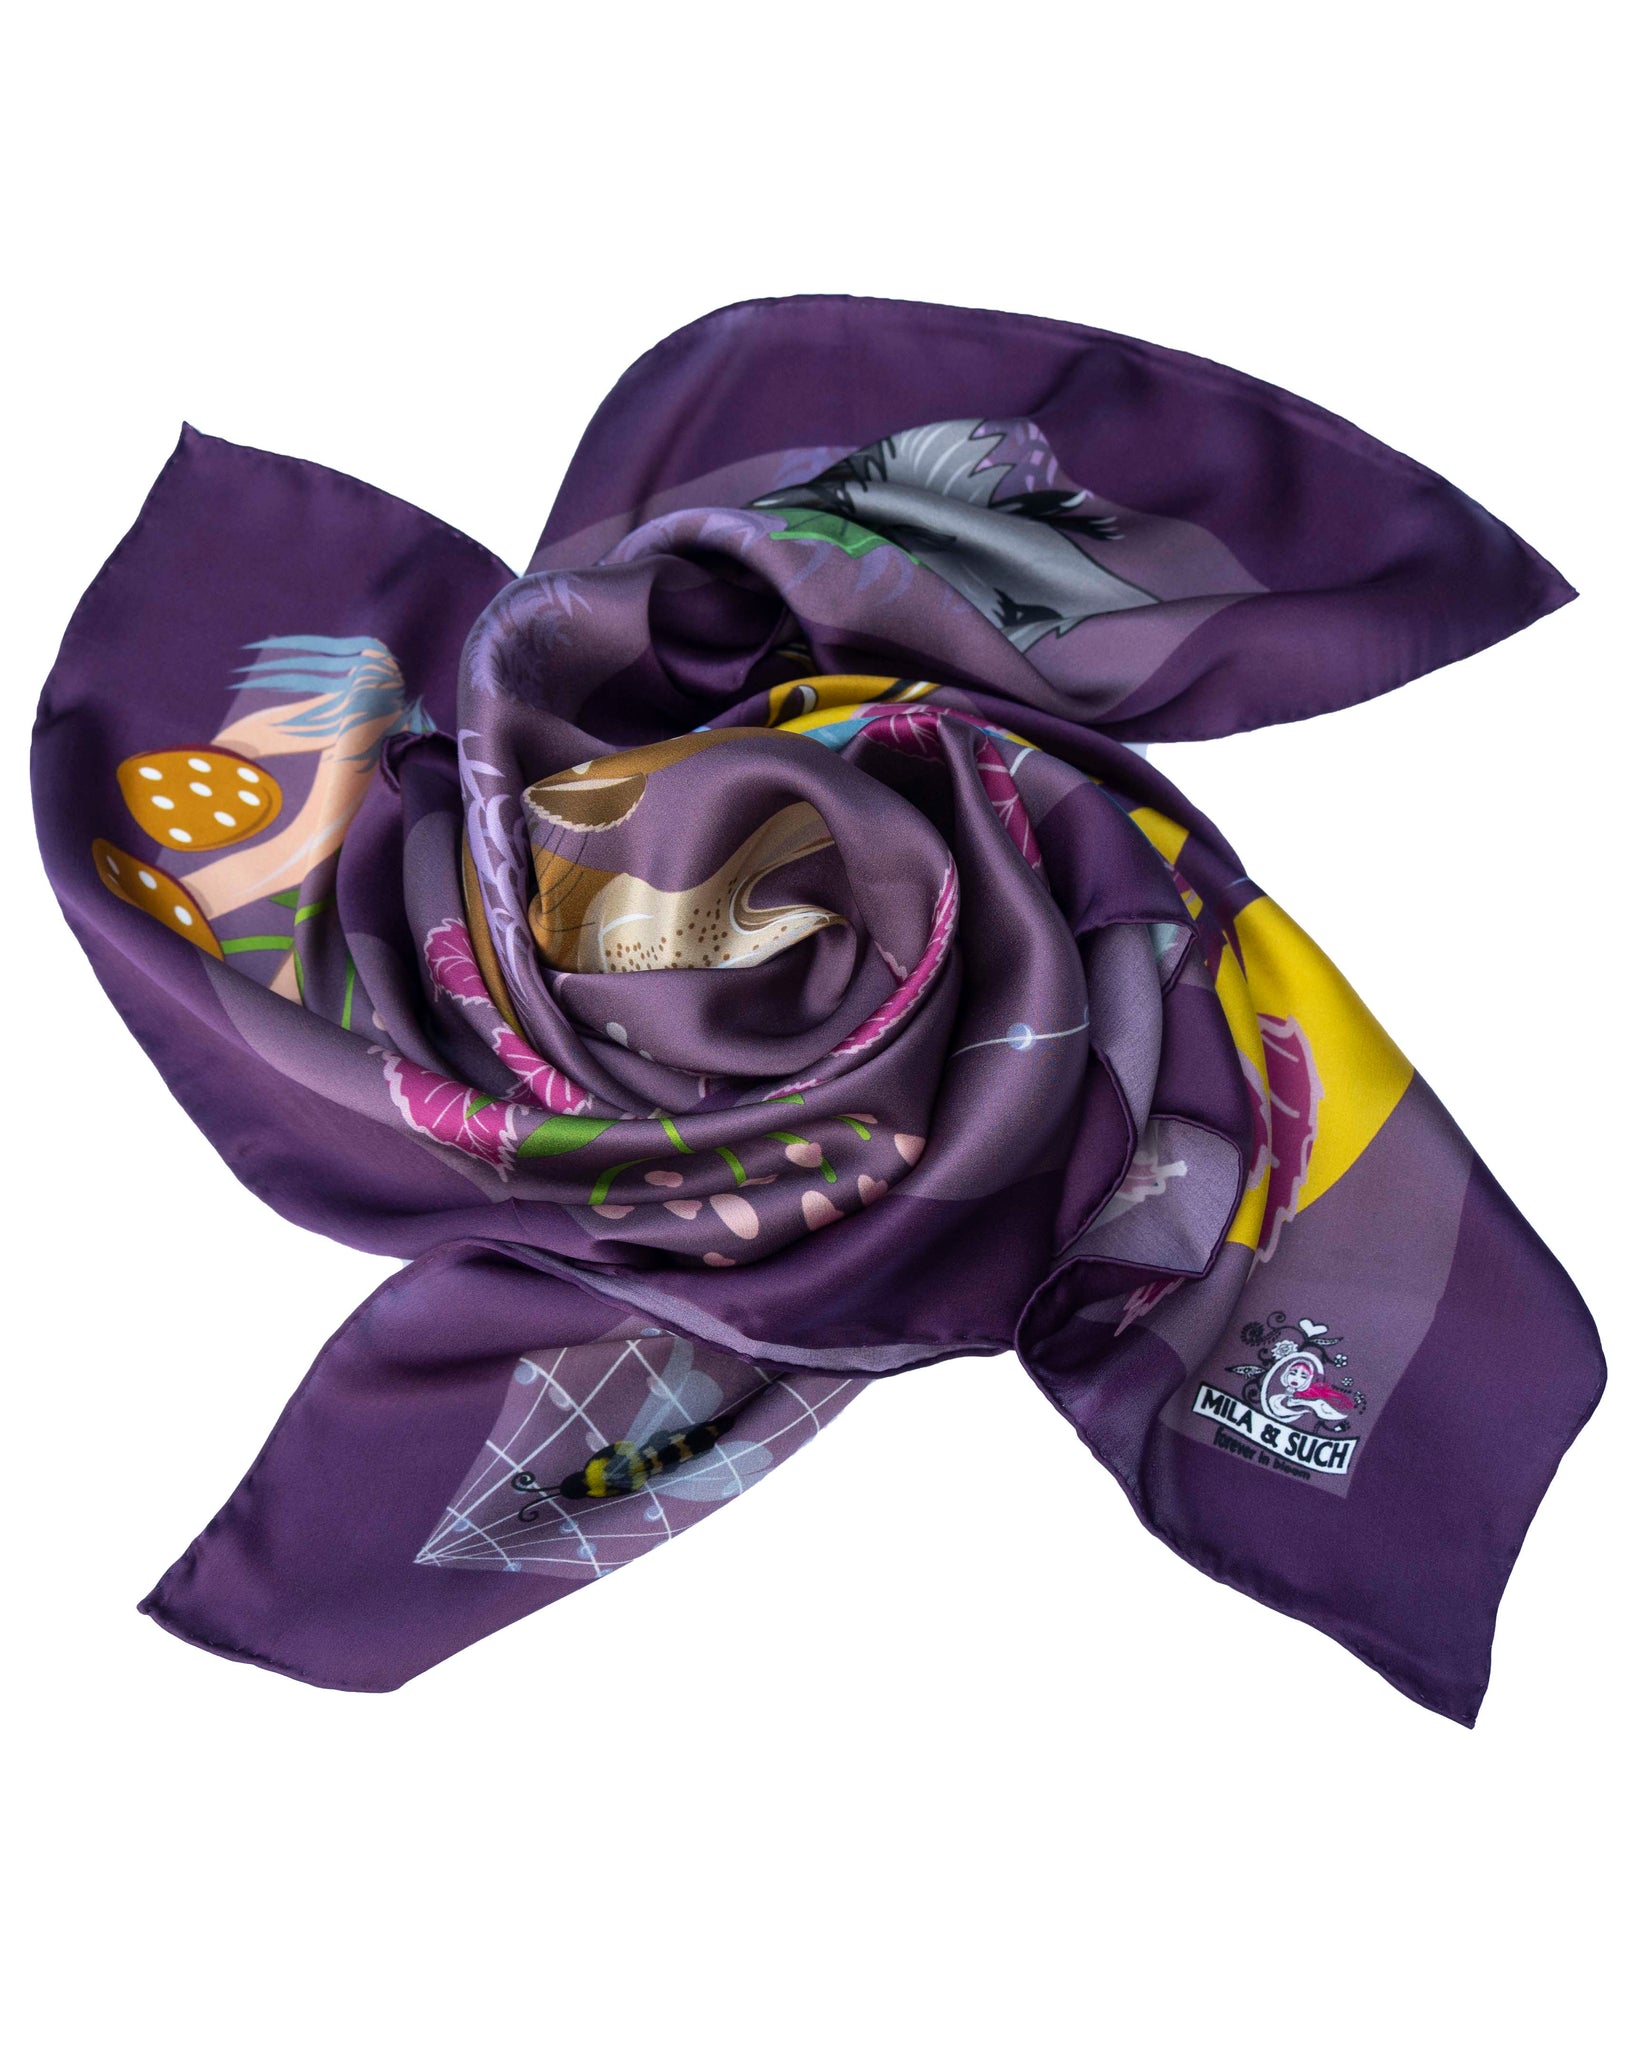 GRACE In The Forest Silk Twill Scarf